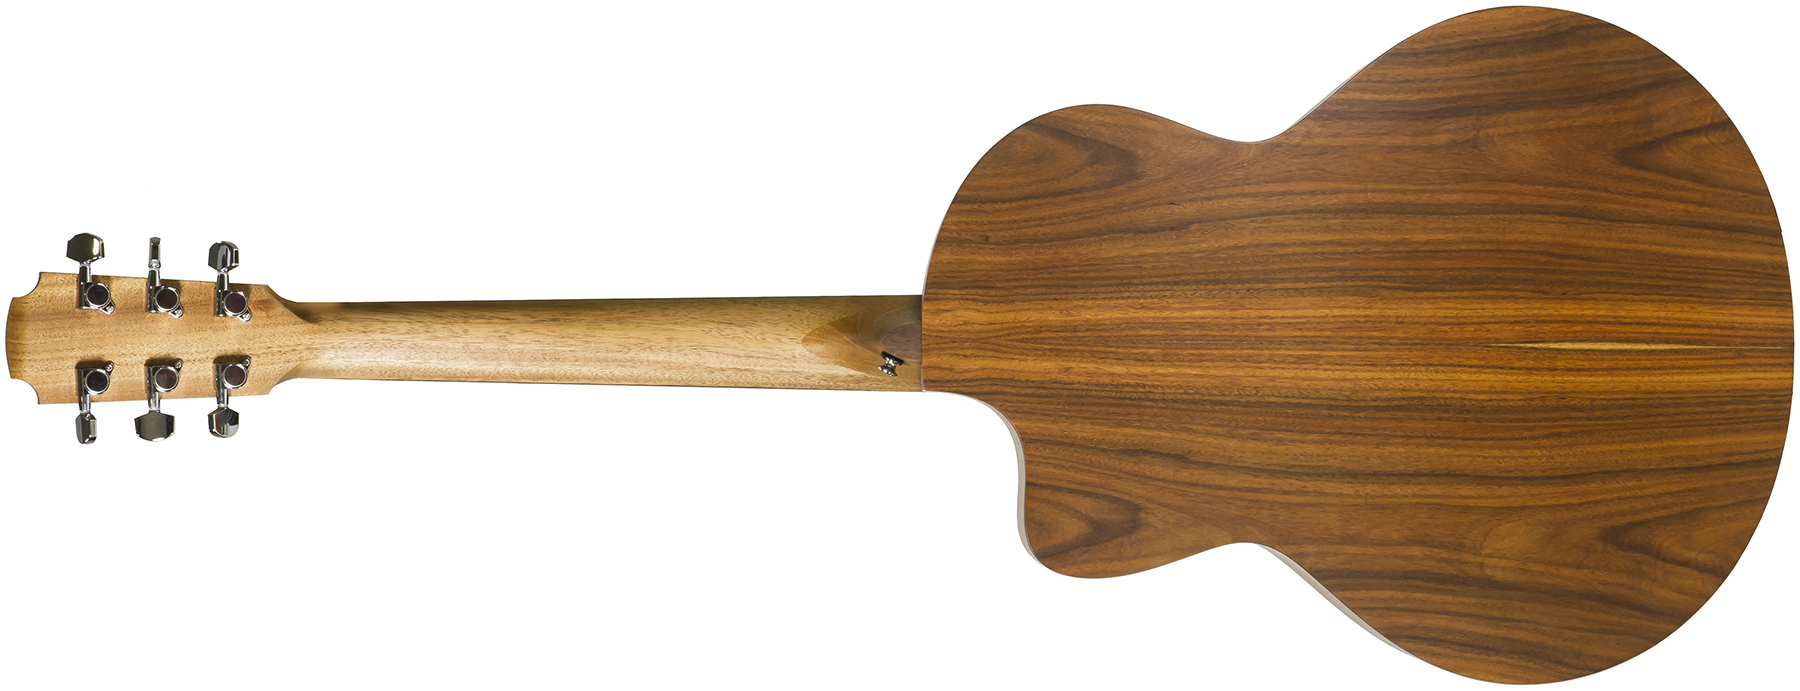 Sheeran By Lowden S03 Orchestra Model Cedre Palissandre Eb +housse - Natural Satin - Guitare Acoustique - Variation 2